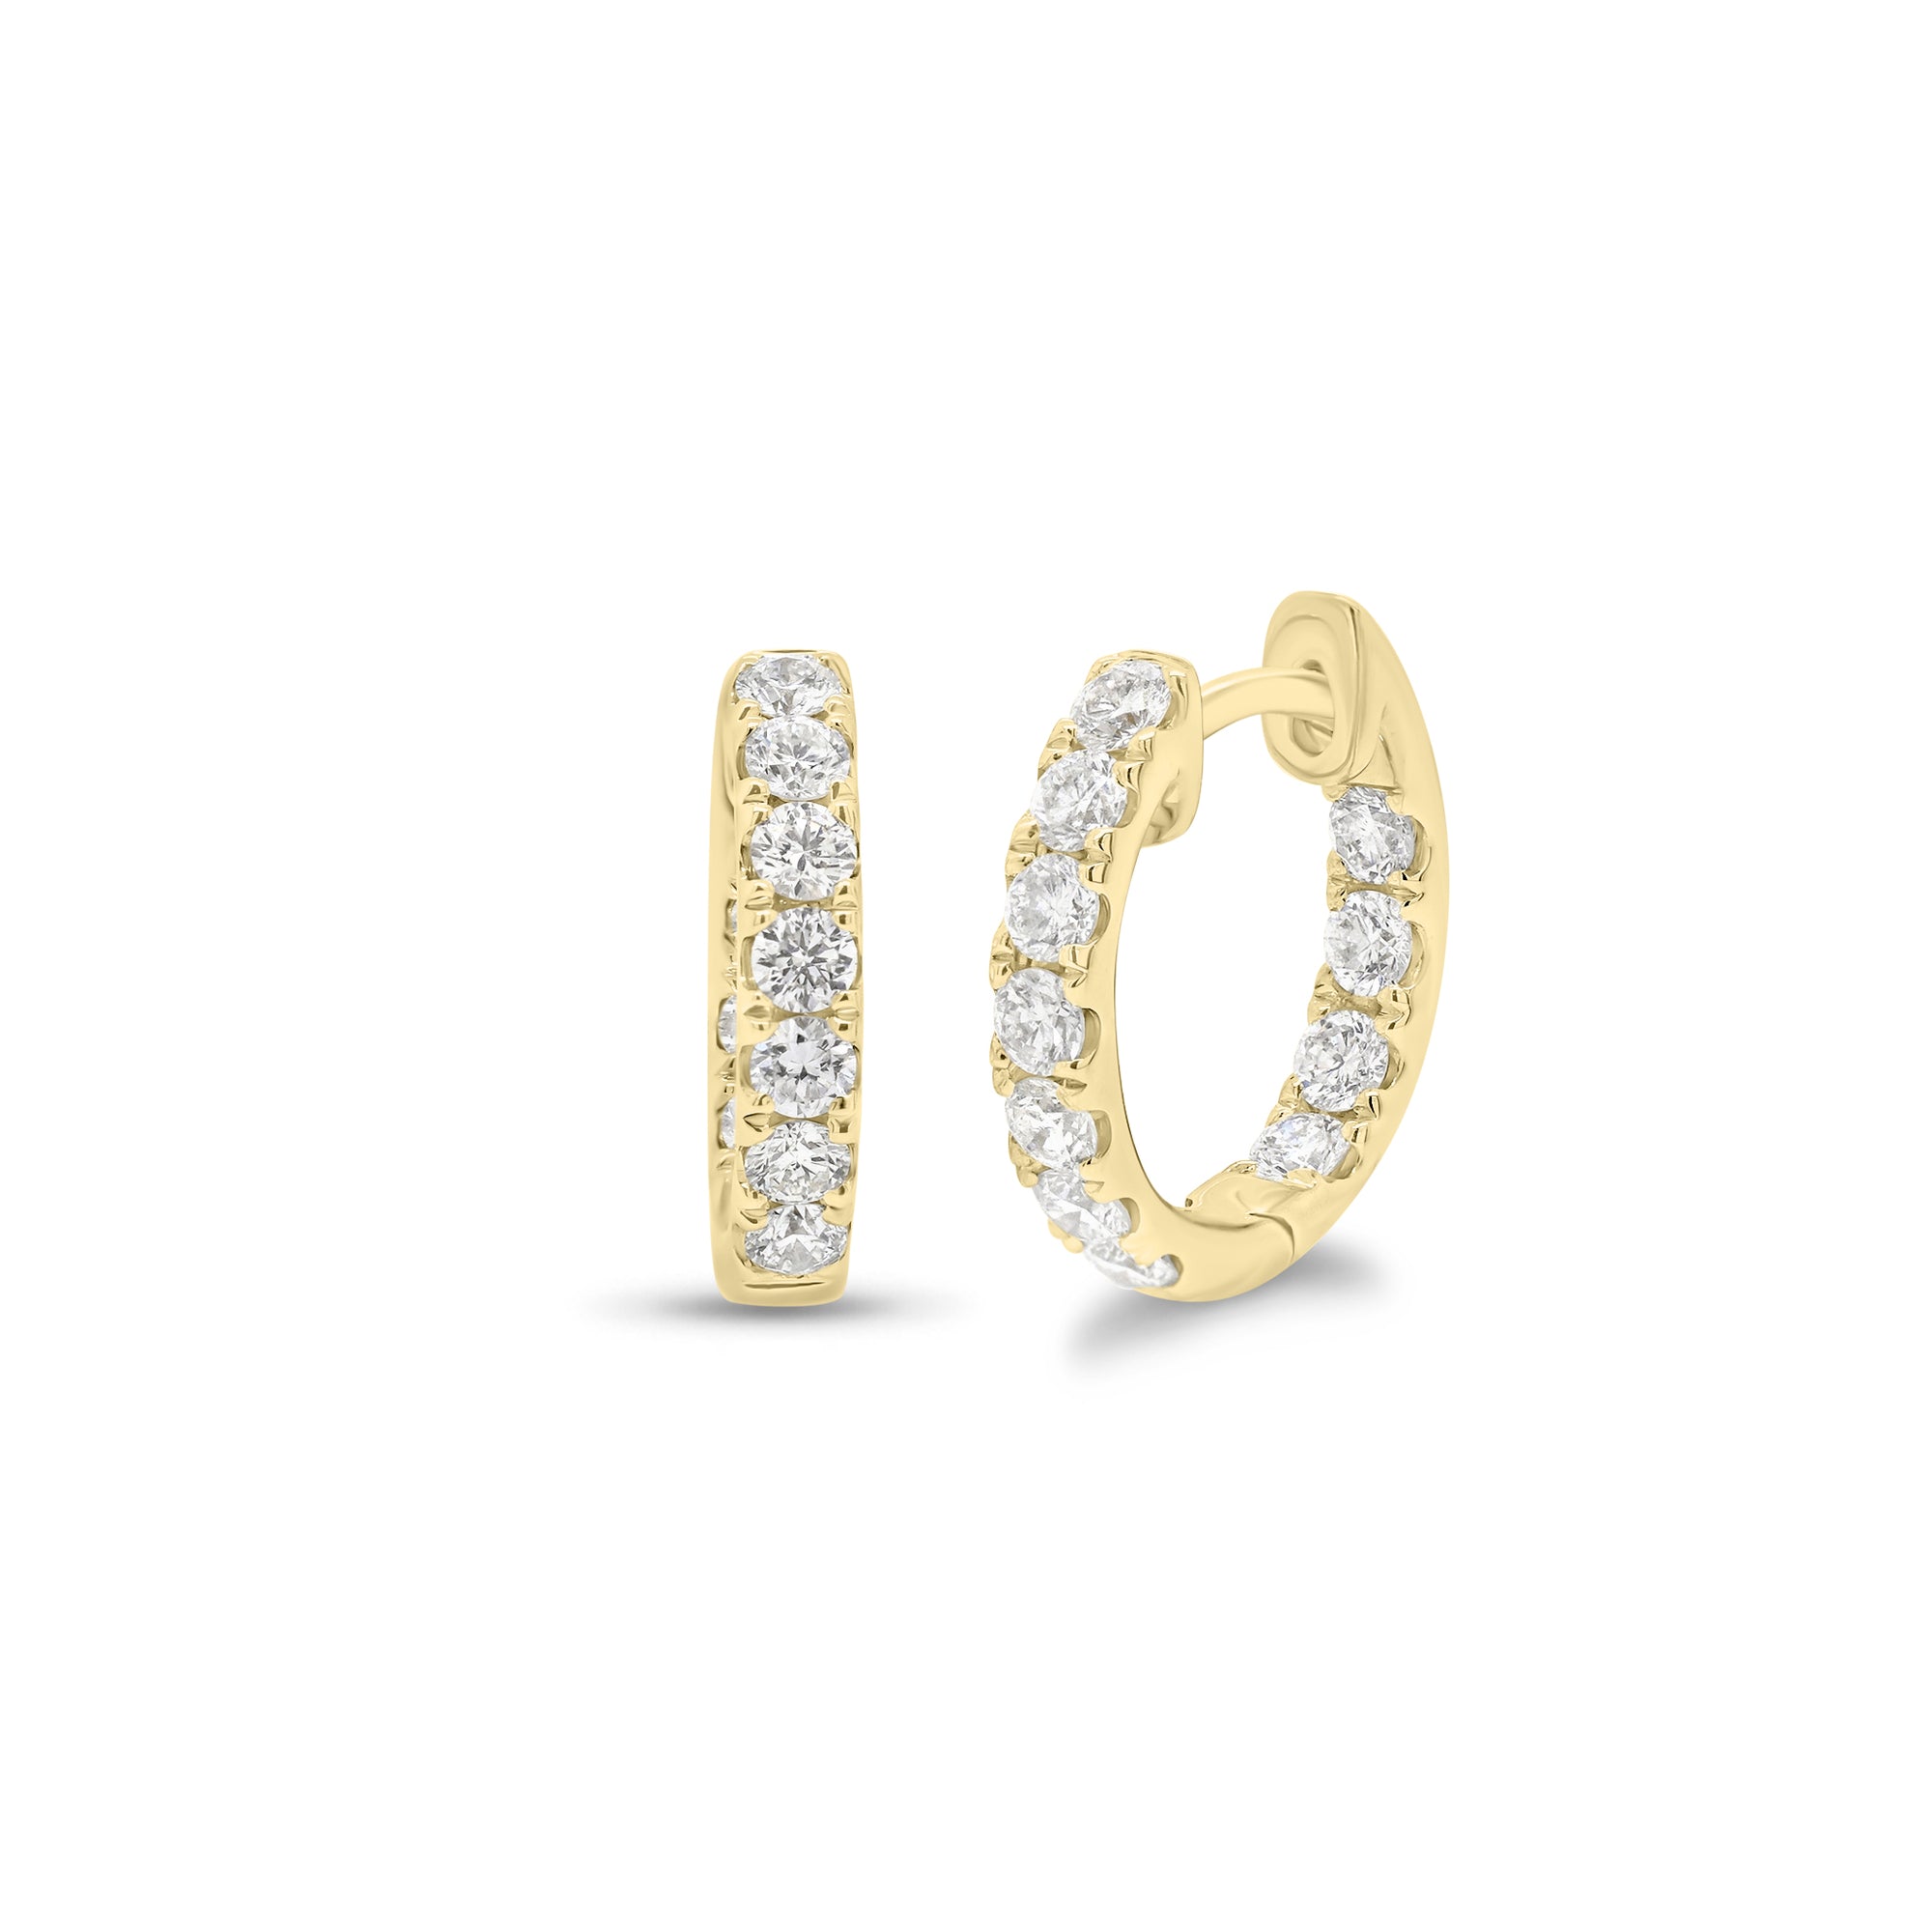 Solid 14K yellow gold weighing 2.77 grams featuring 18 round diamonds weighing 0.39 carats  0.39 ct Huggie Earrings | Nuha Jewelers